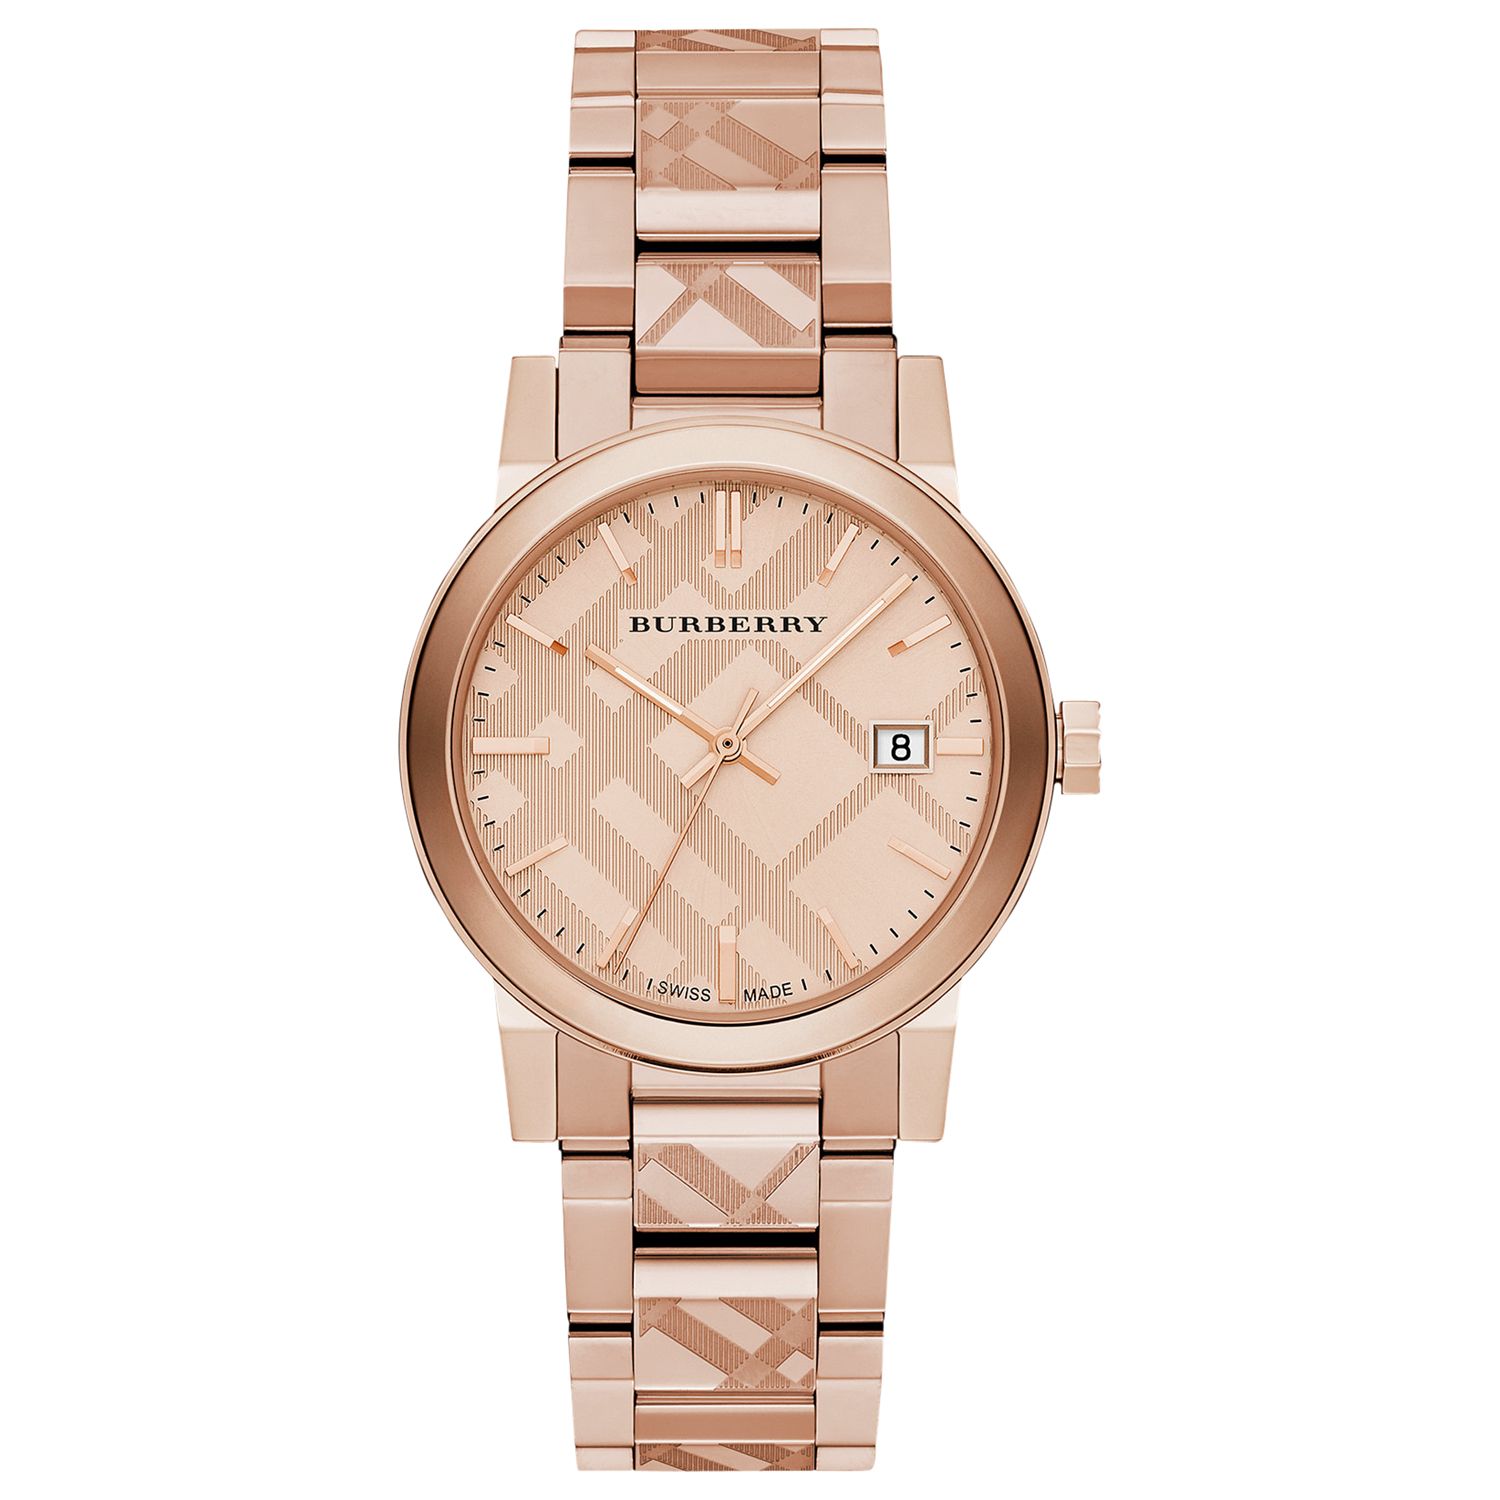 Burberry BU9039 Women's The City Date Bracelet Strap Watch, Rose Gold is no  longer available online